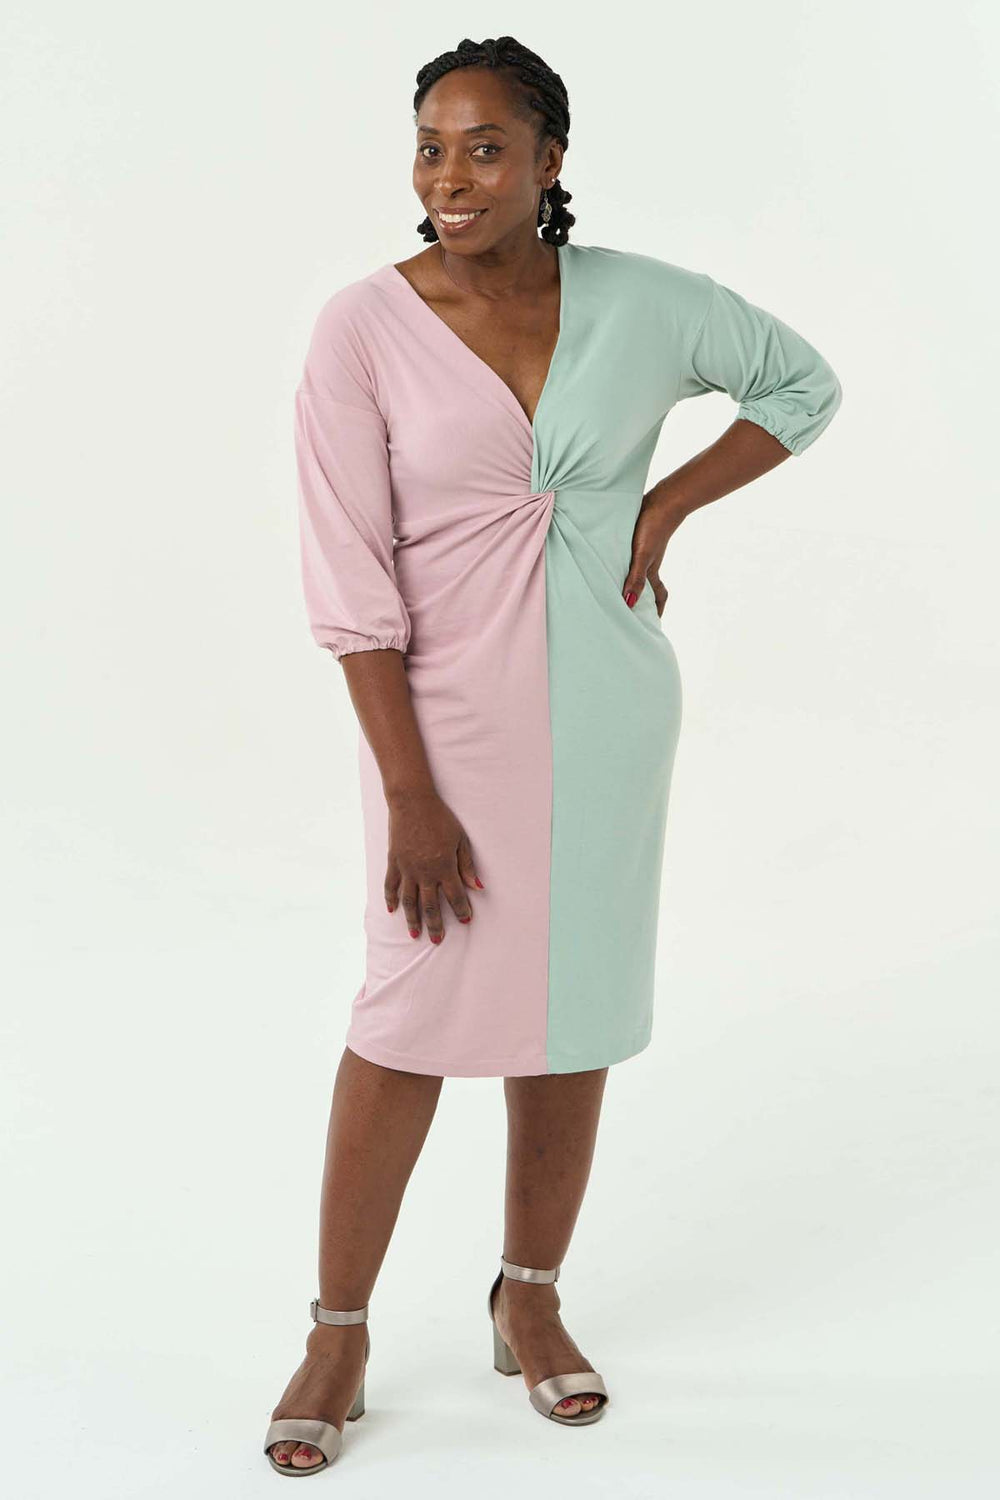 Women wearing the Portia Dress sewing pattern from Sew Over It on The Fold Line. A knit dress pattern made in viscose jersey, bamboo jersey or lightweight cotton jersey fabrics, featuring a fitted silhouette, V-neck, colour blocked, just below knee length